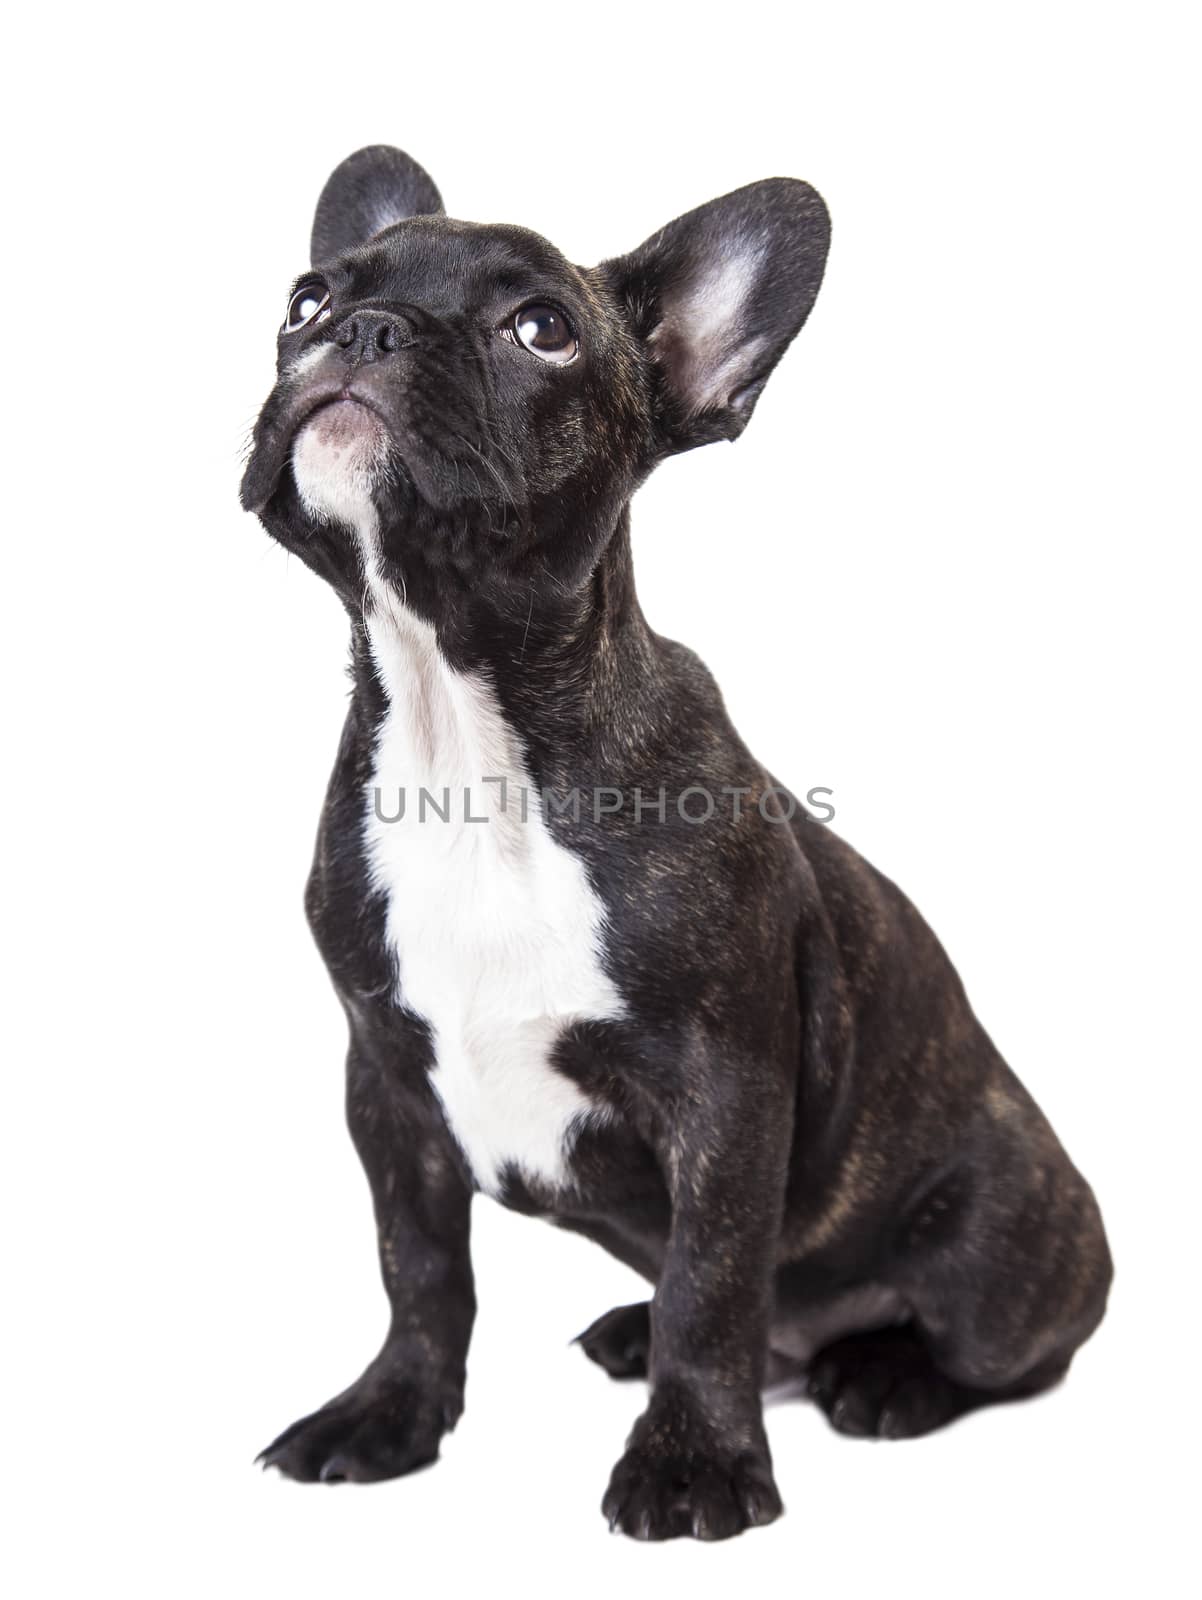 puppy dog looking up isolated on white background